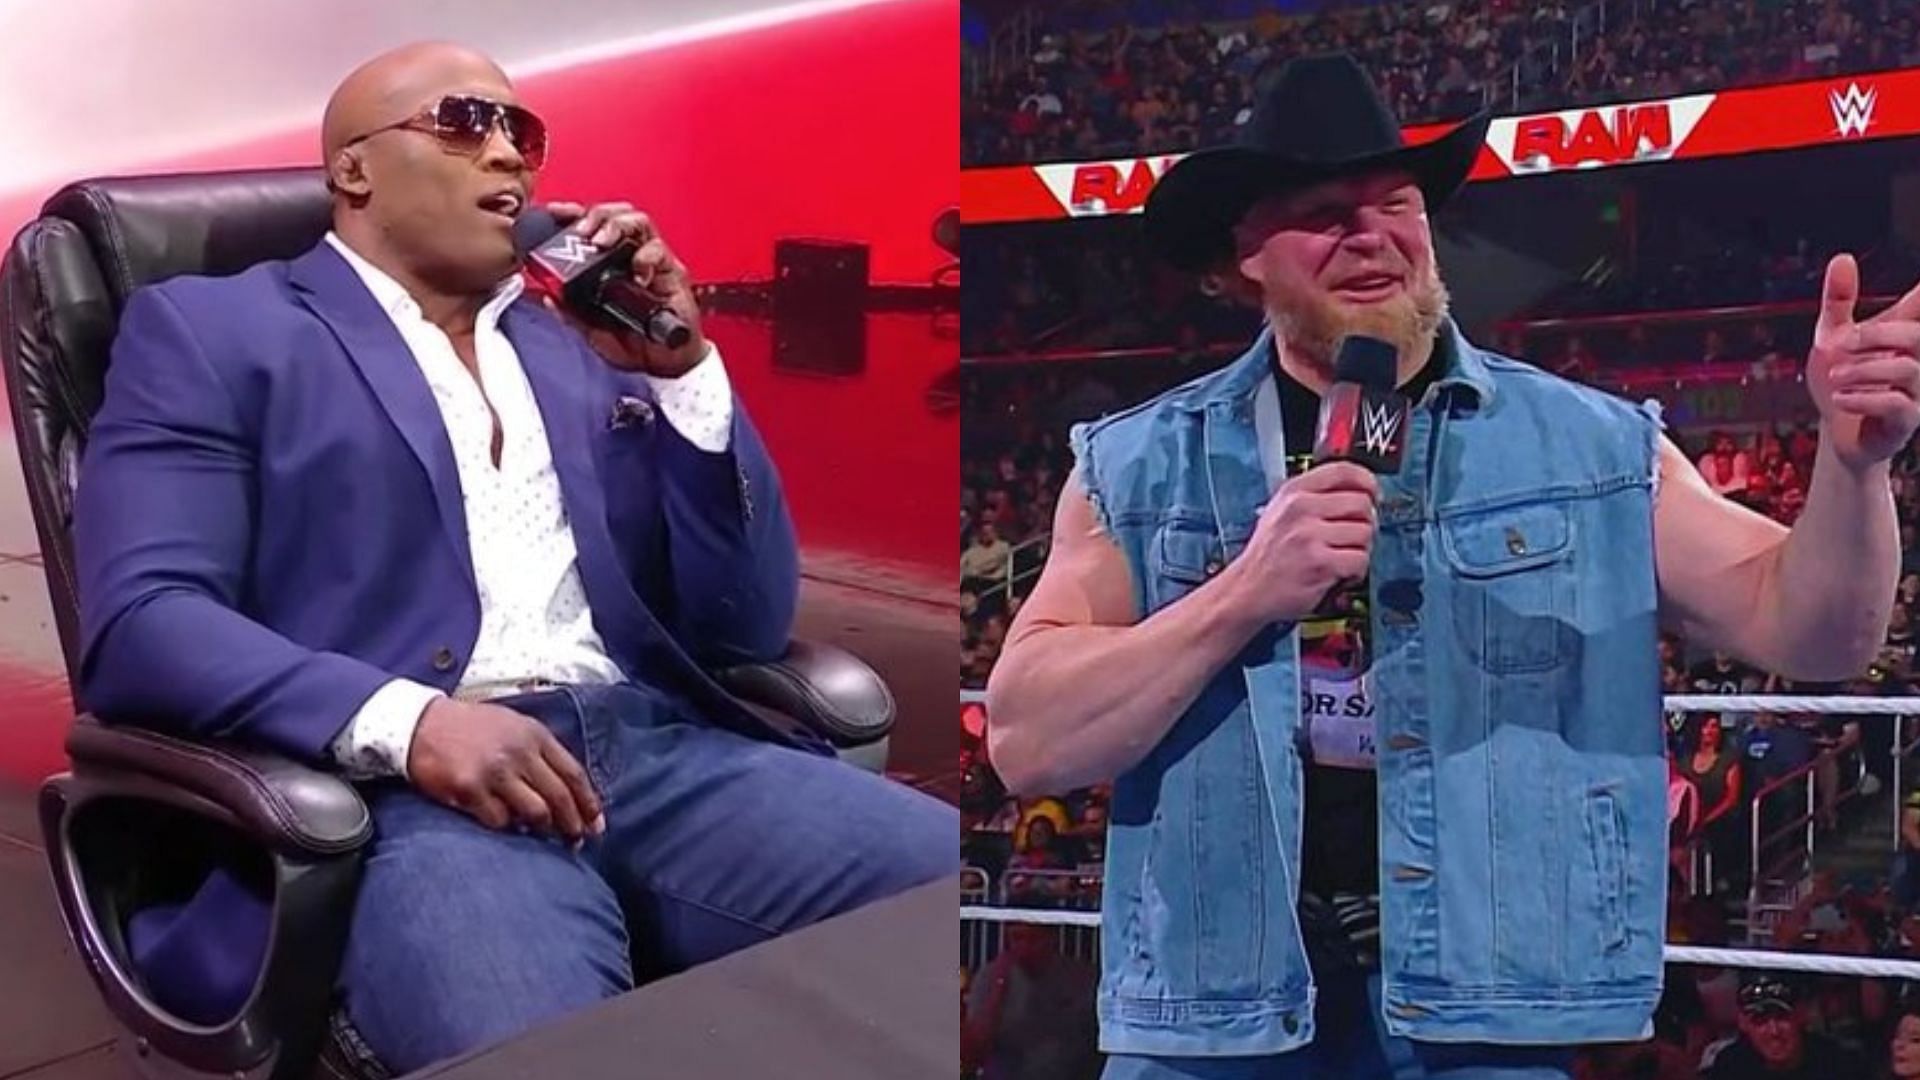 Bobby Lashley and Brock Lesnar were involved in another major segment on RAW